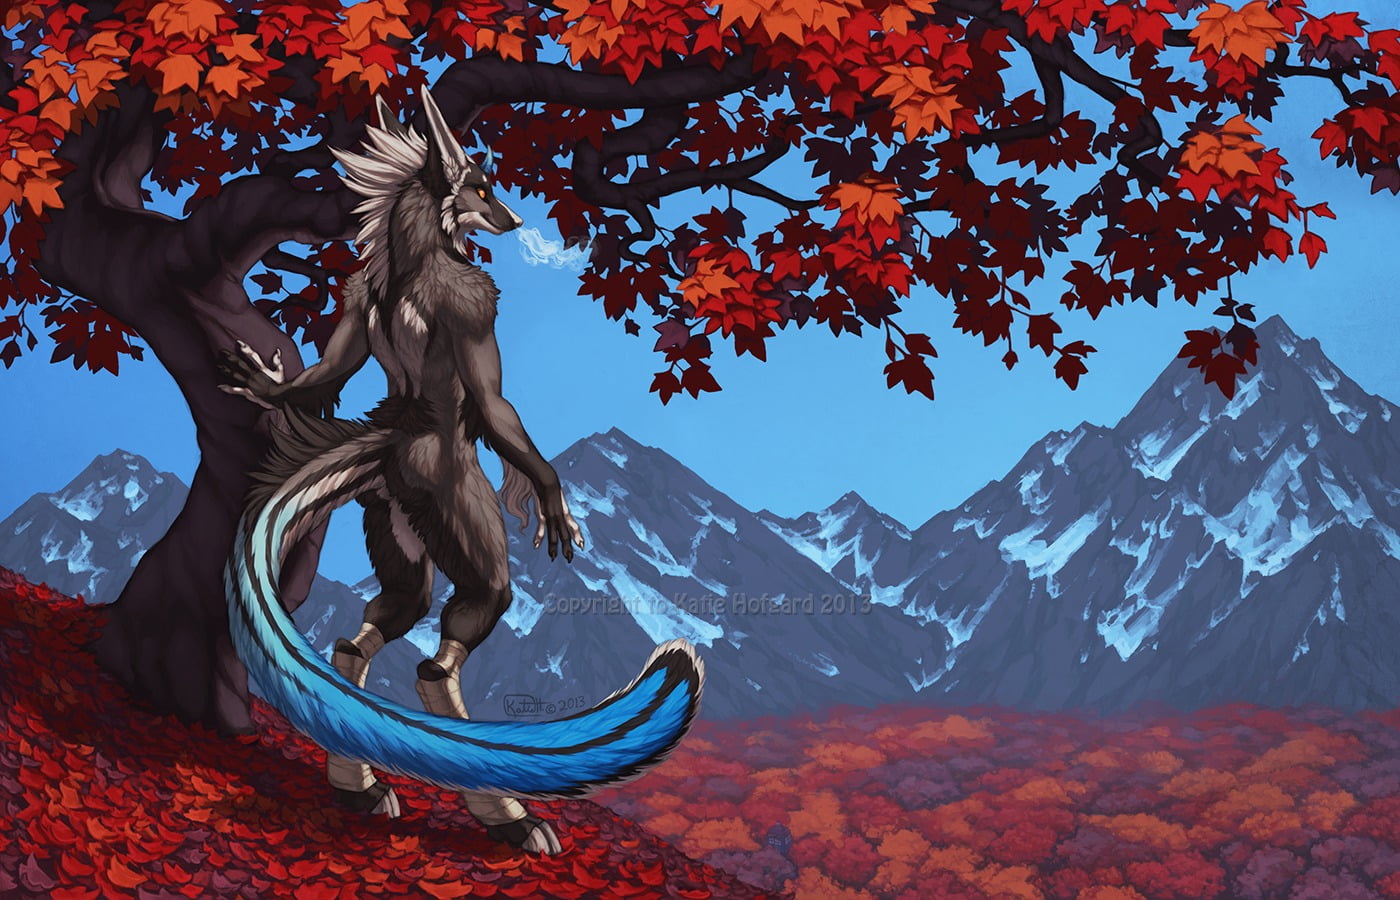 furry, Anthro, animals, fall, beauty in nature, tree, mountain